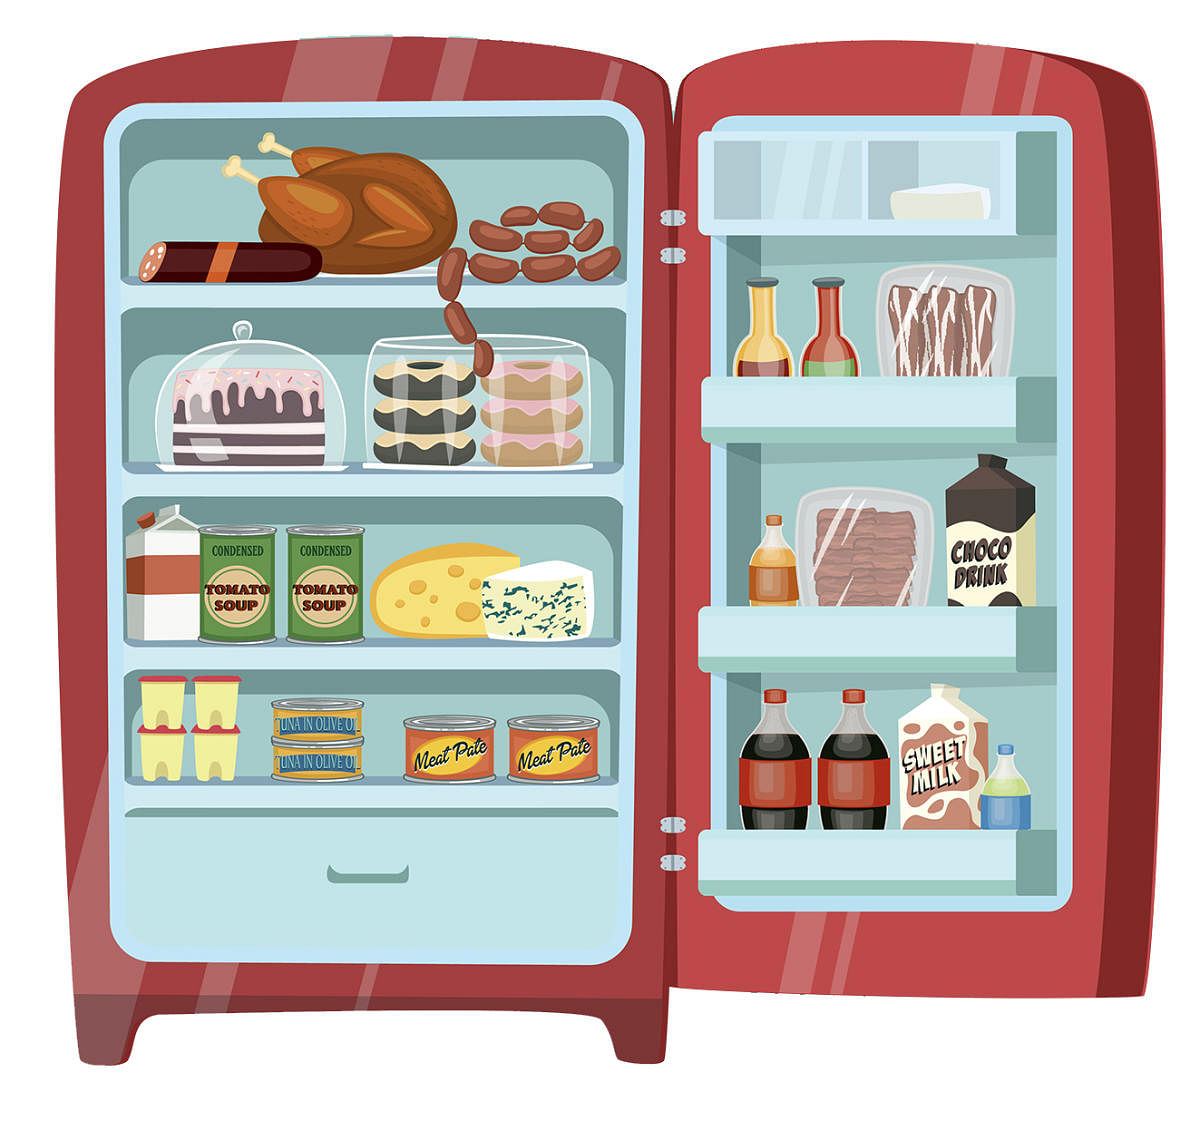 Retro refrigerator full of food. Vintage fridge filled with daily products vector illustration. Saving freshness of meal. Weekly nutrients supply. Space organization in freezer. Home abundance concept